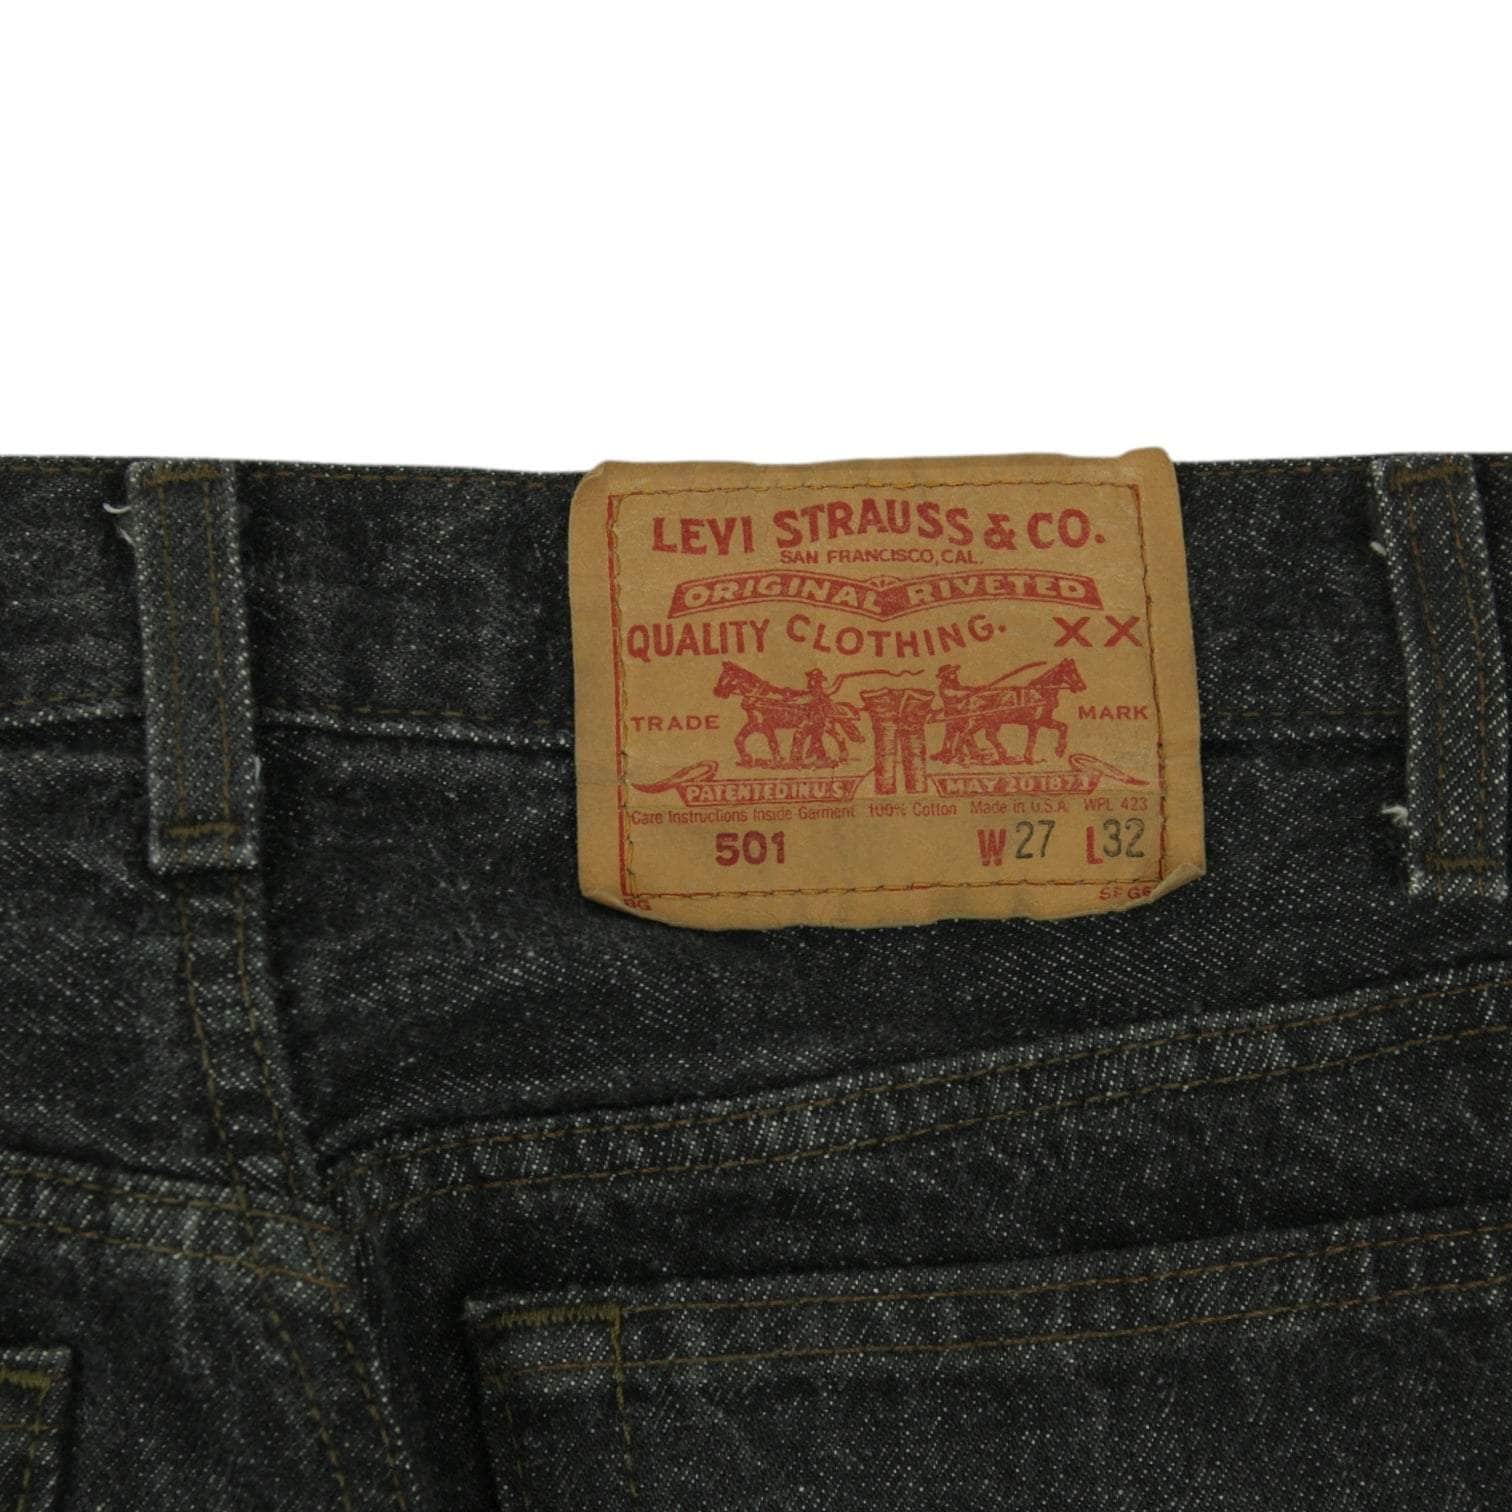 Levi Strauss 501 Grey Washed Jeans